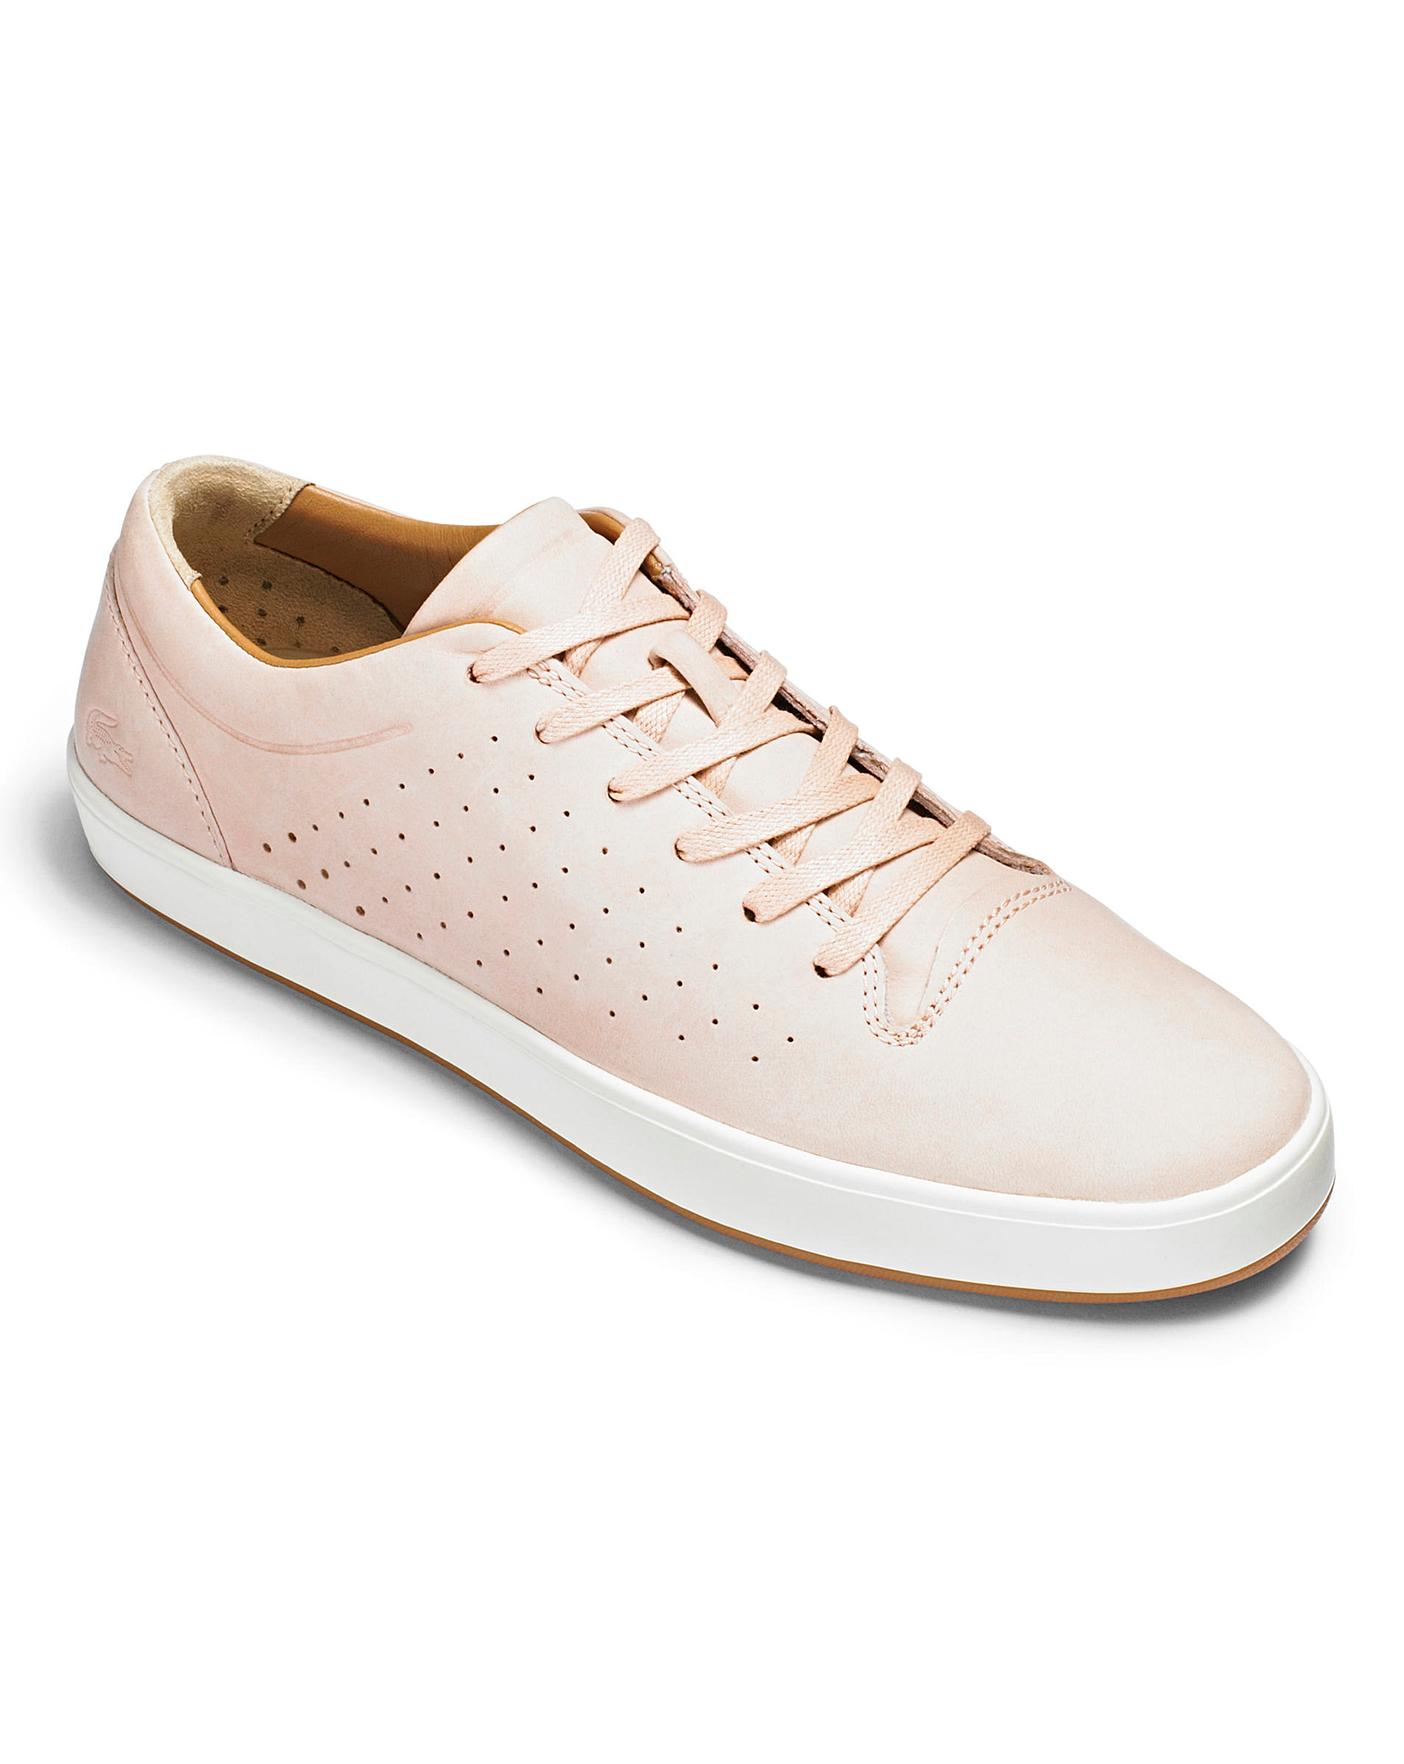 Lacoste Tamora Lace Up Trainers | Simply Be